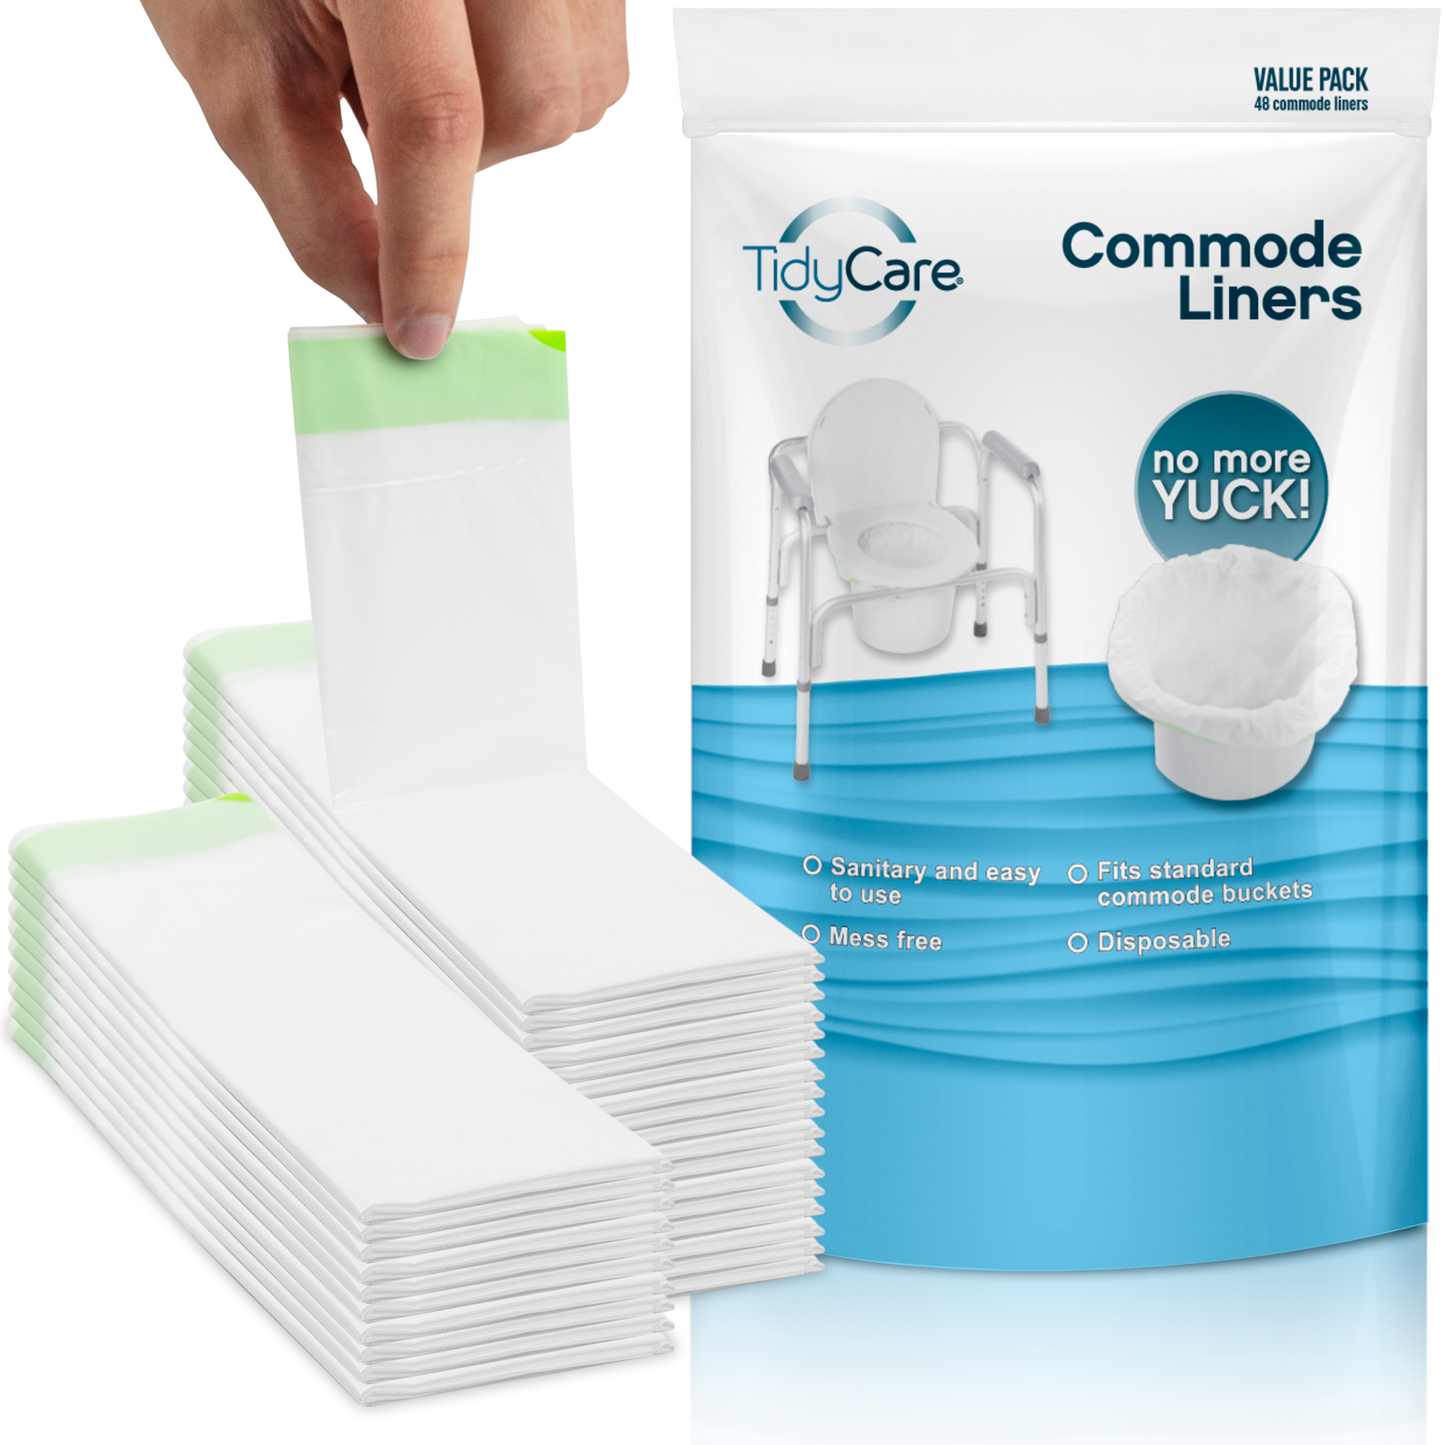 TidyCare Commode Liners for Bedside Portable Toilet Chair Bucket | Value Pack of Disposable Waste Bags for Adults | Universal Fit